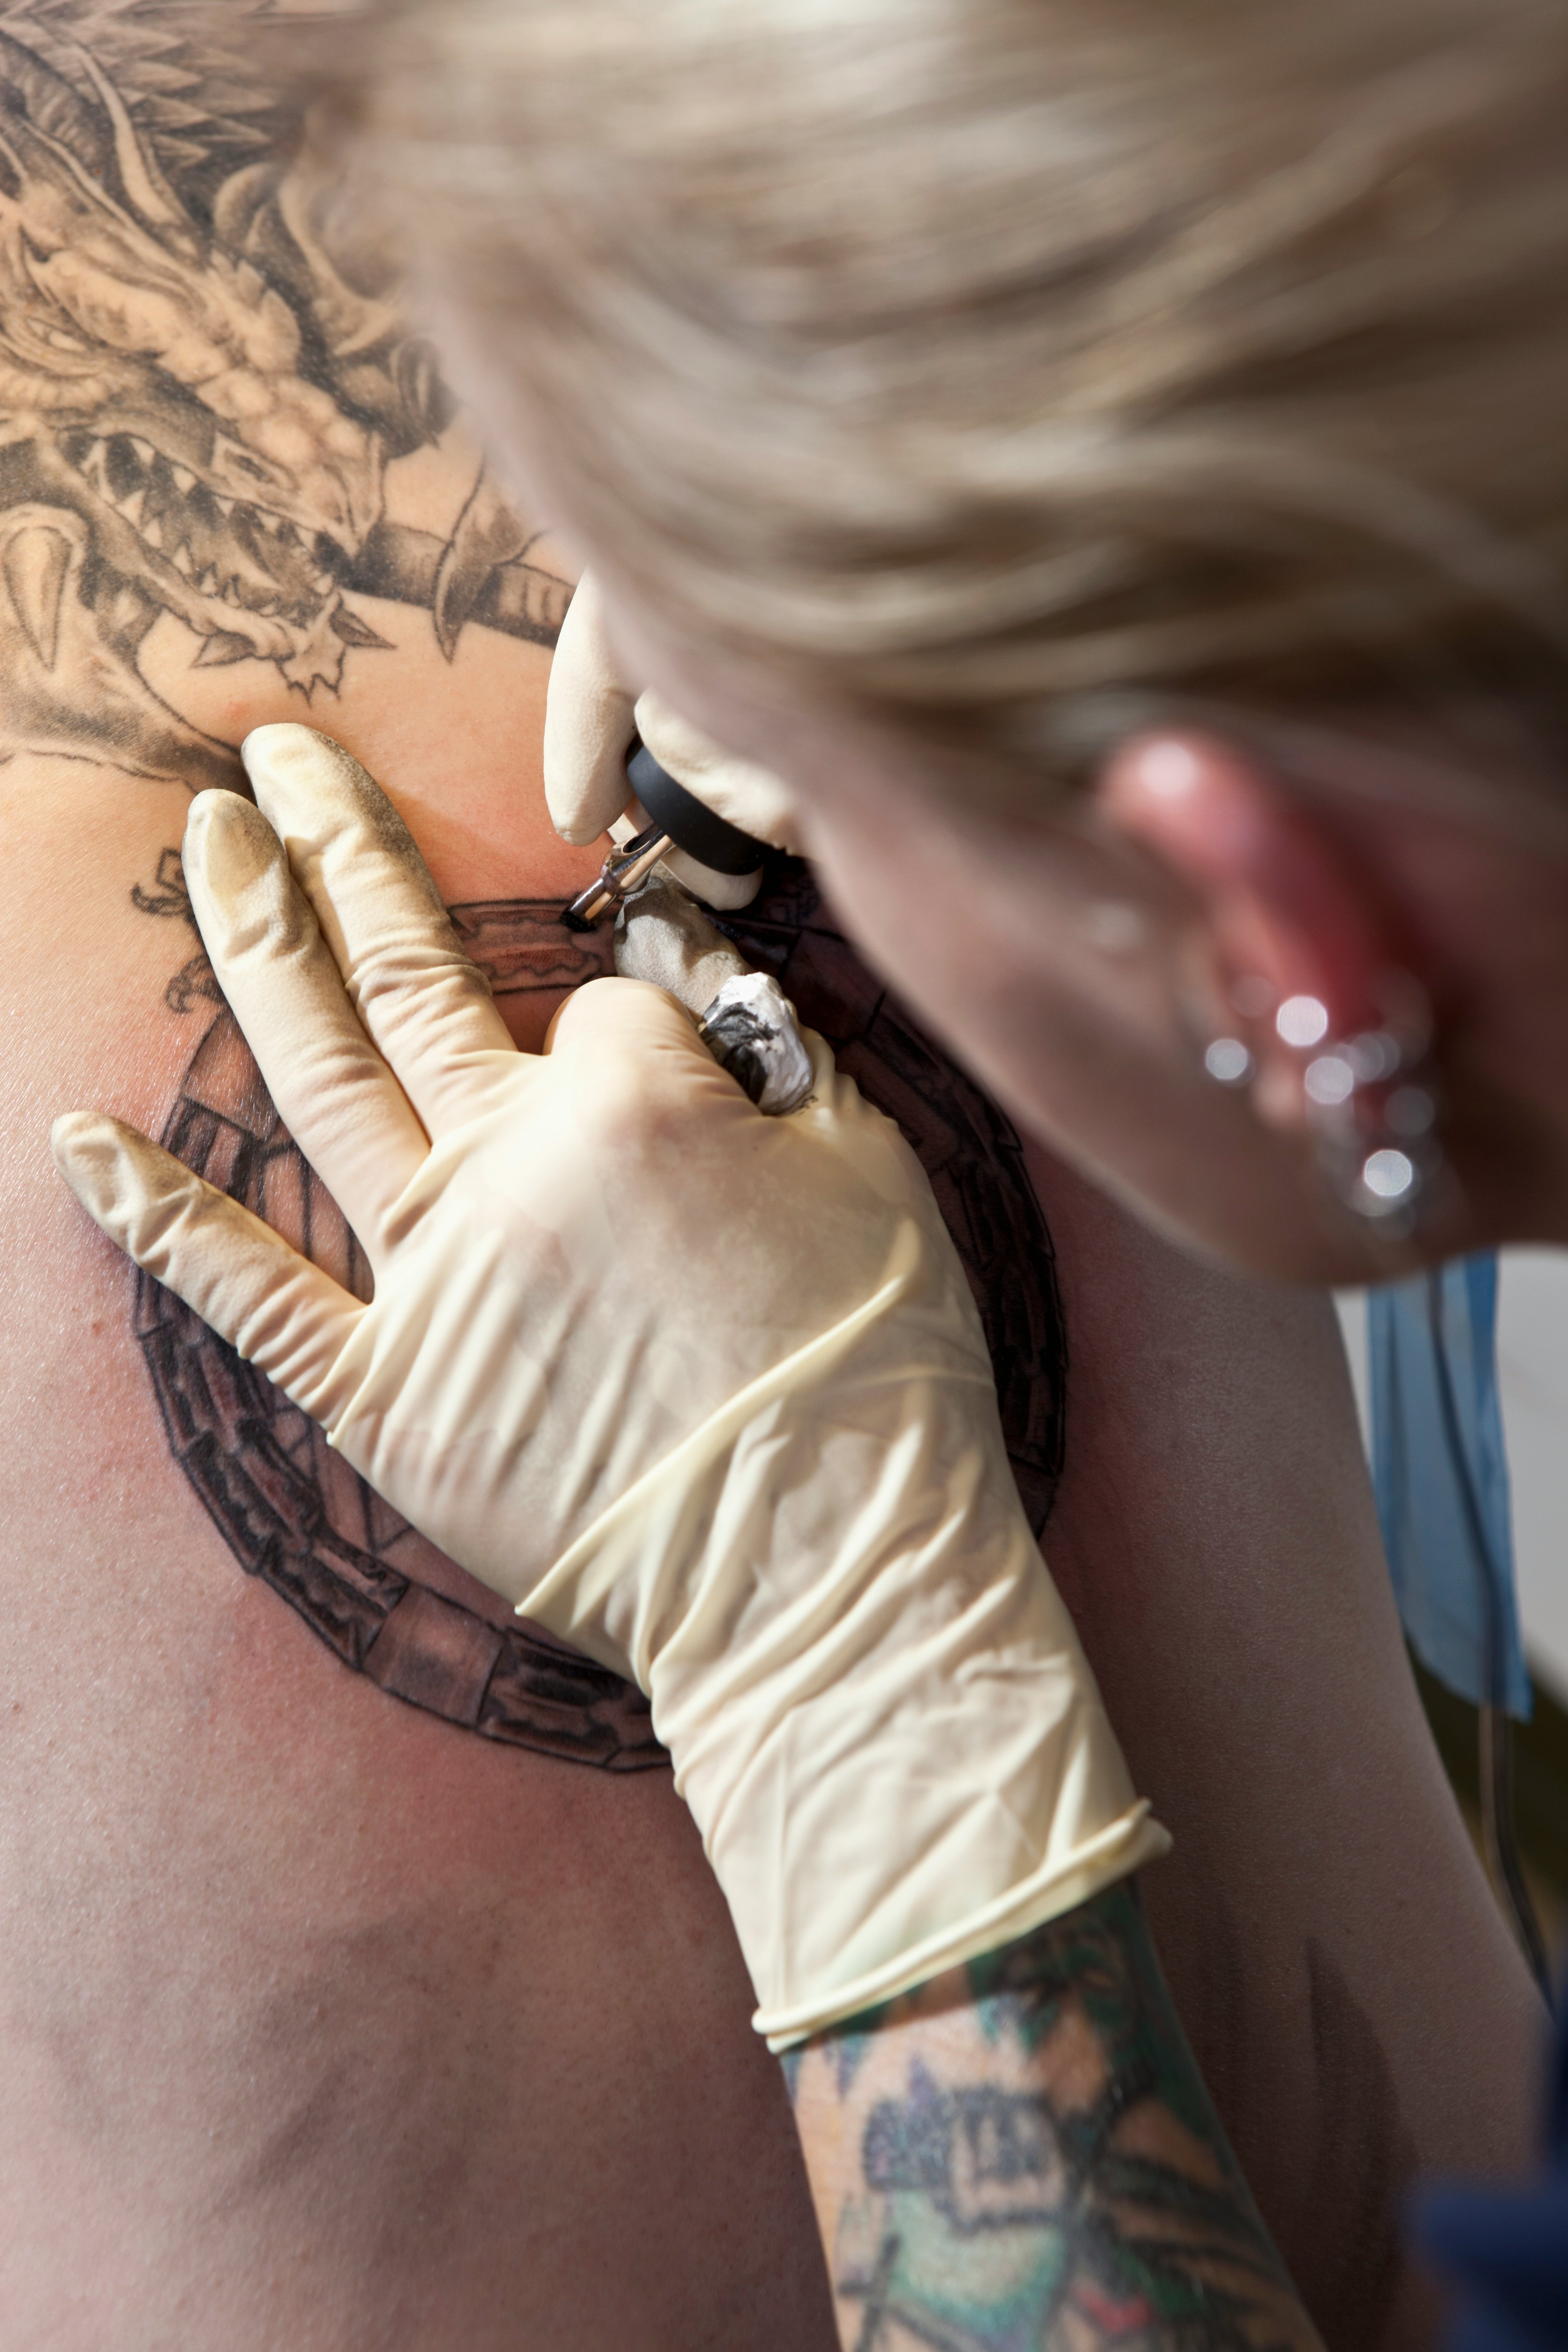 7 strange tattoos that can bring bad luck